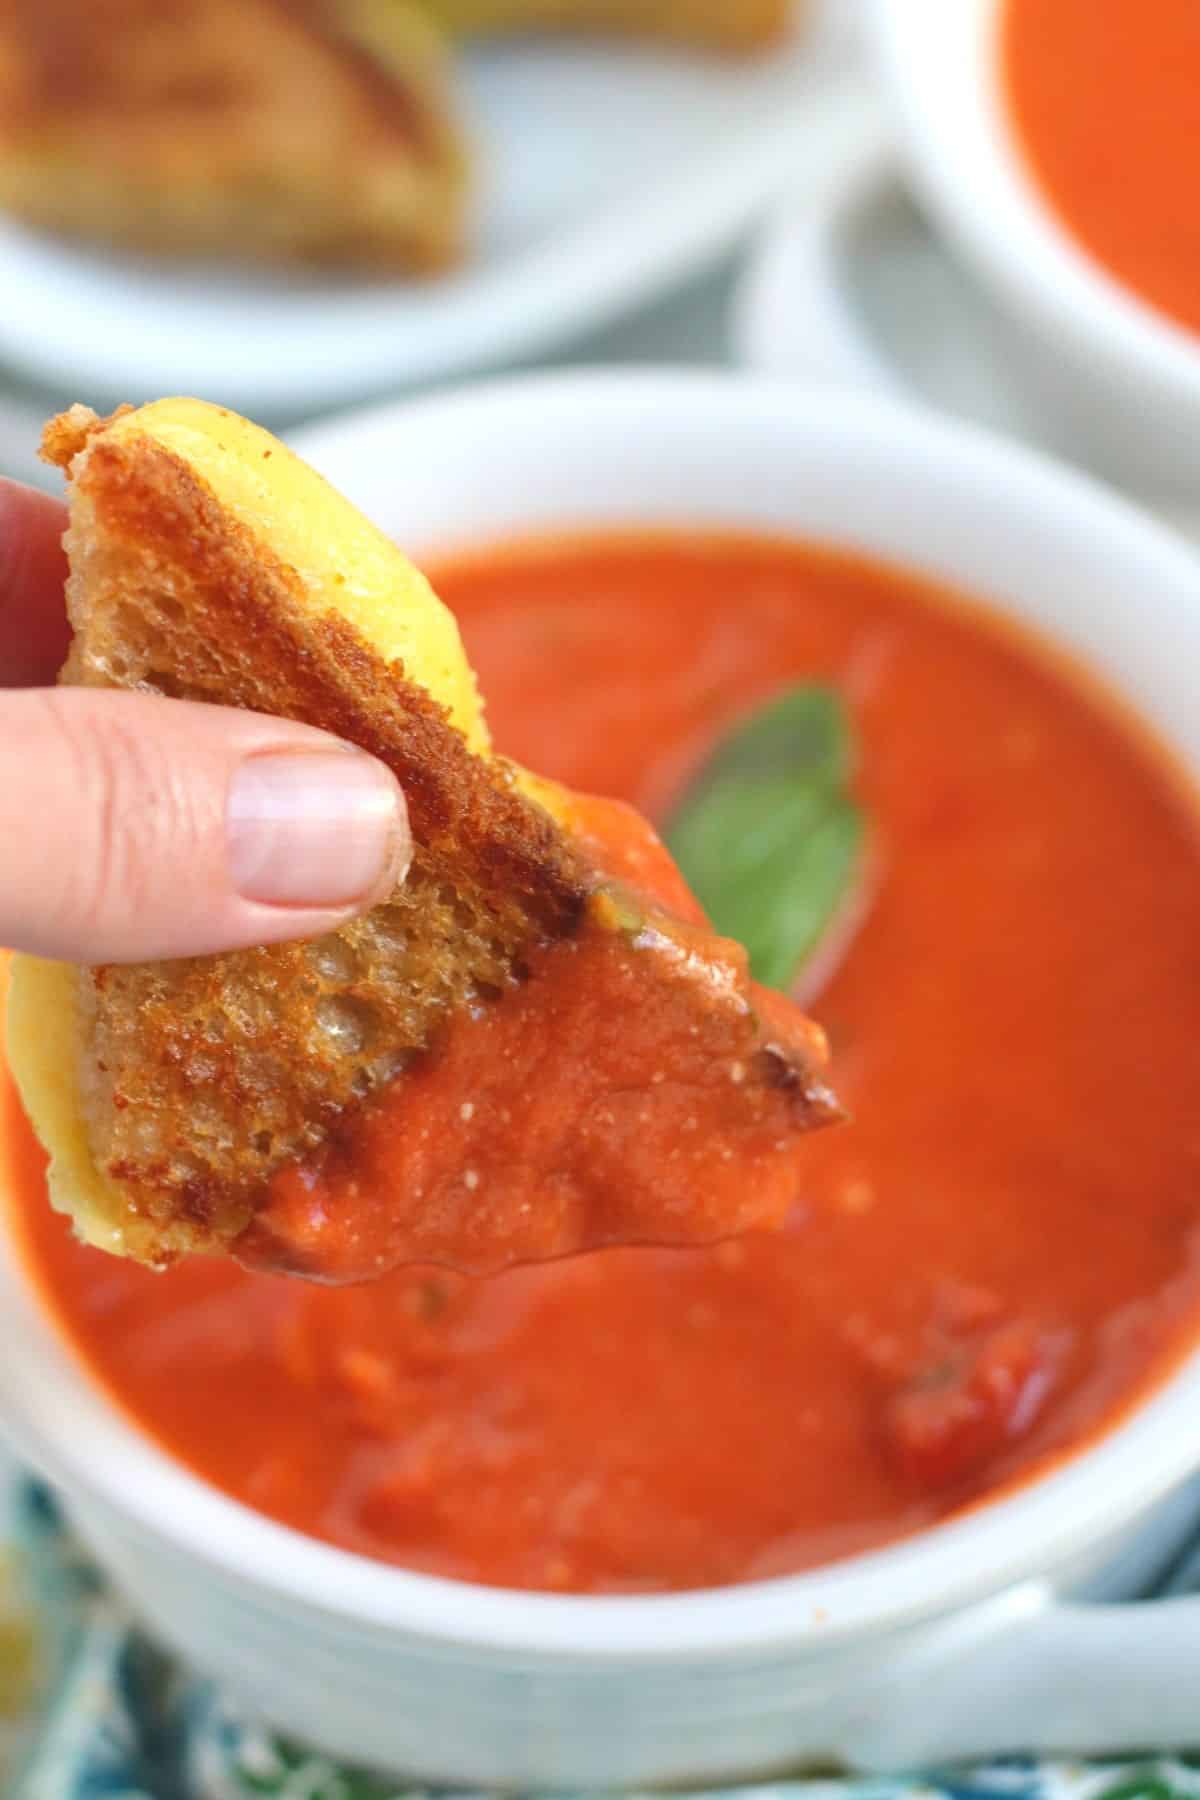 Hand dipping a grilled cheese sandwich triangle into a bowl of soup.